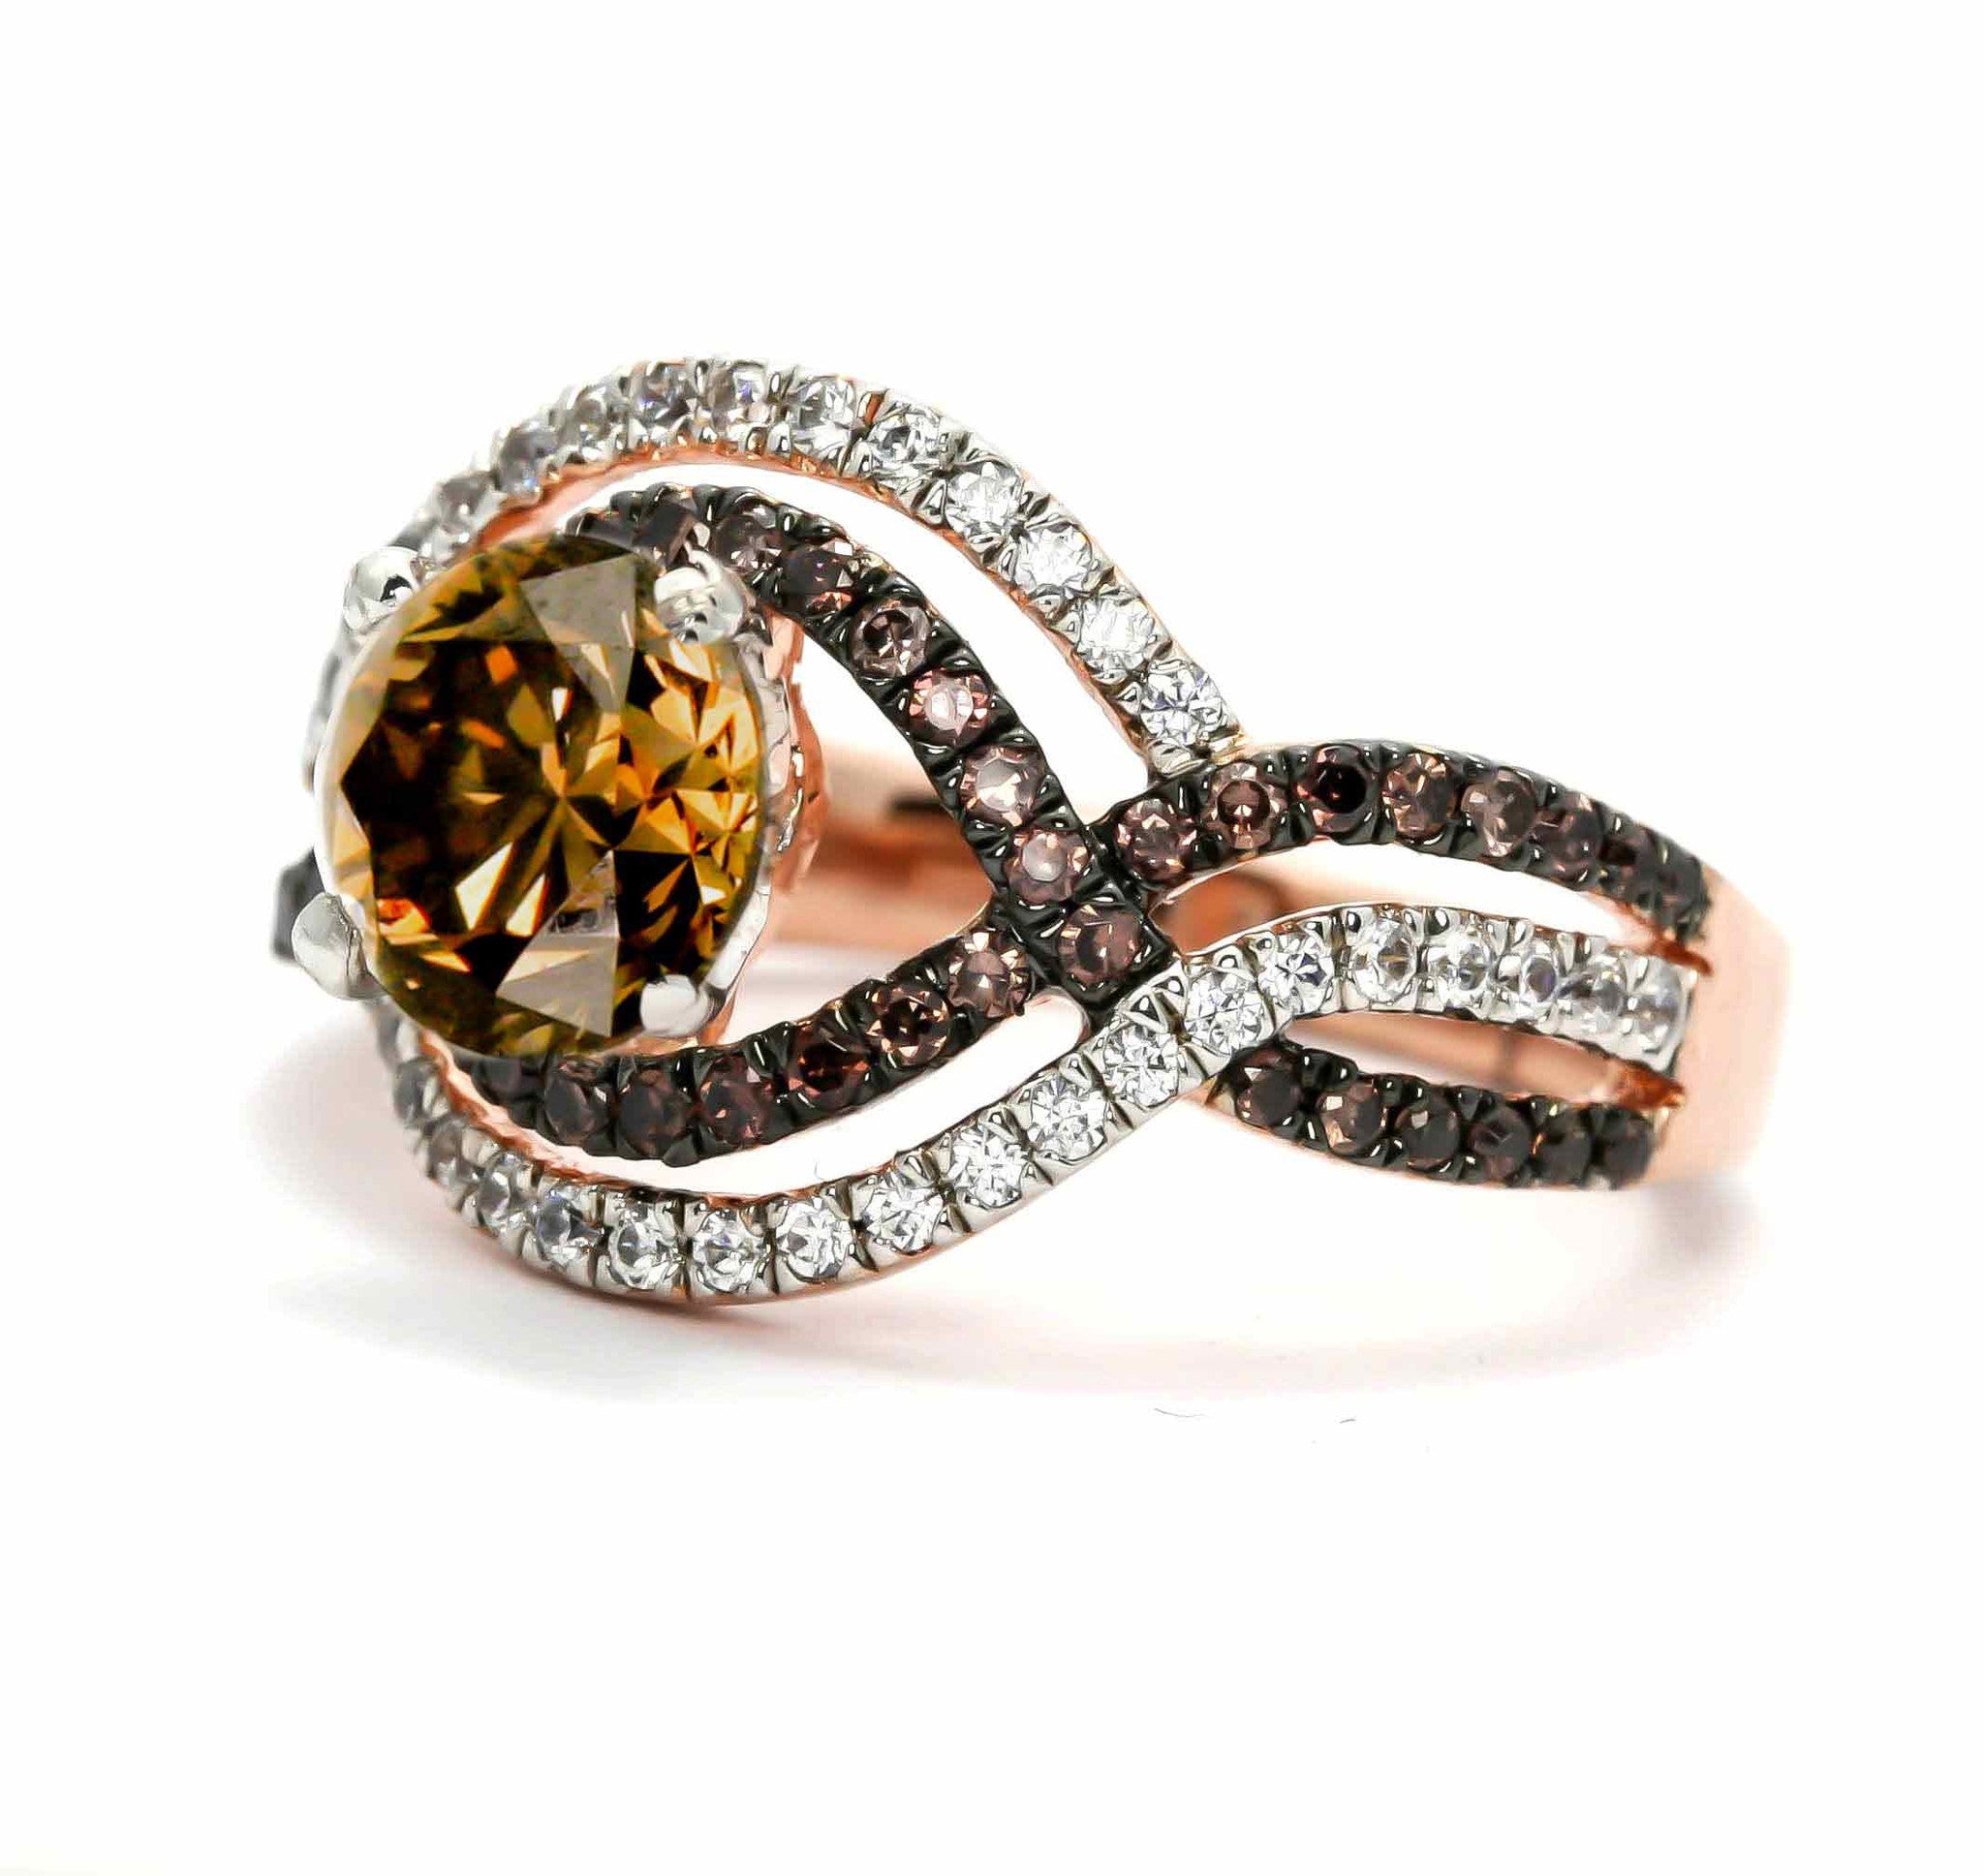 Unique Halo Infinity 1 Carat Fancy Brown Diamond Engagement Ring with Rose Gold, White & Brown Diamond Accent Stones, Anniversary Ring - BD94616